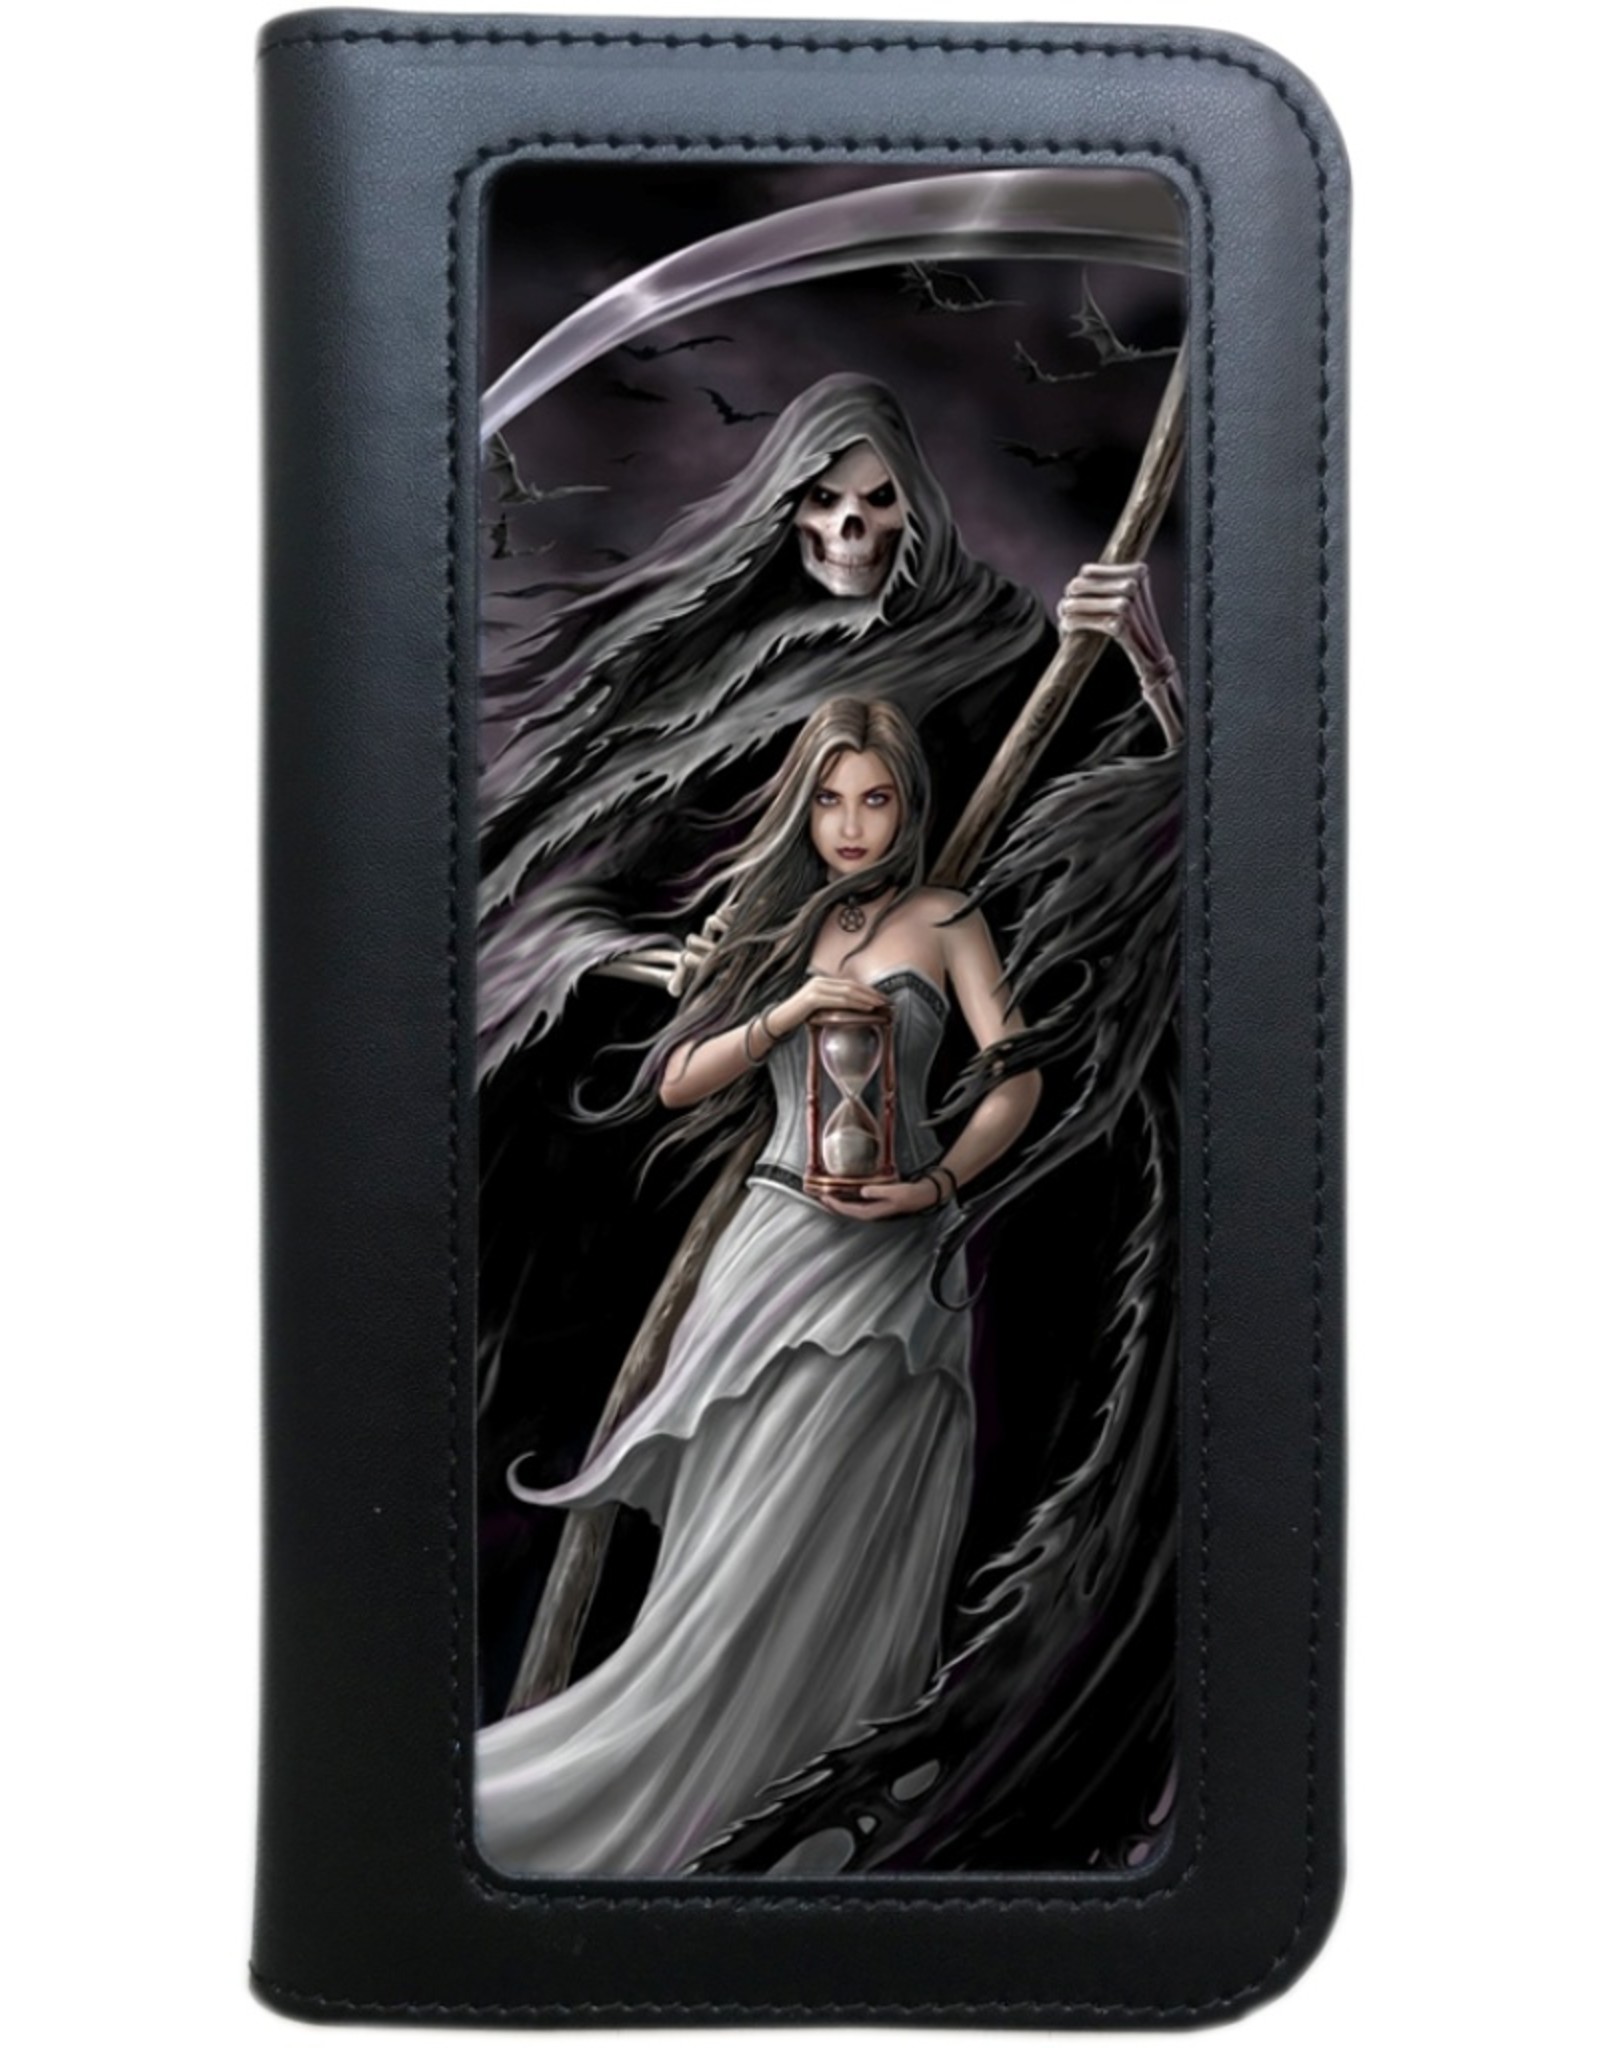 Anne Stokes 3D Wallets and Purses - 3D lenticular Phone Wallet Summon The Reaper - Anne Stokes